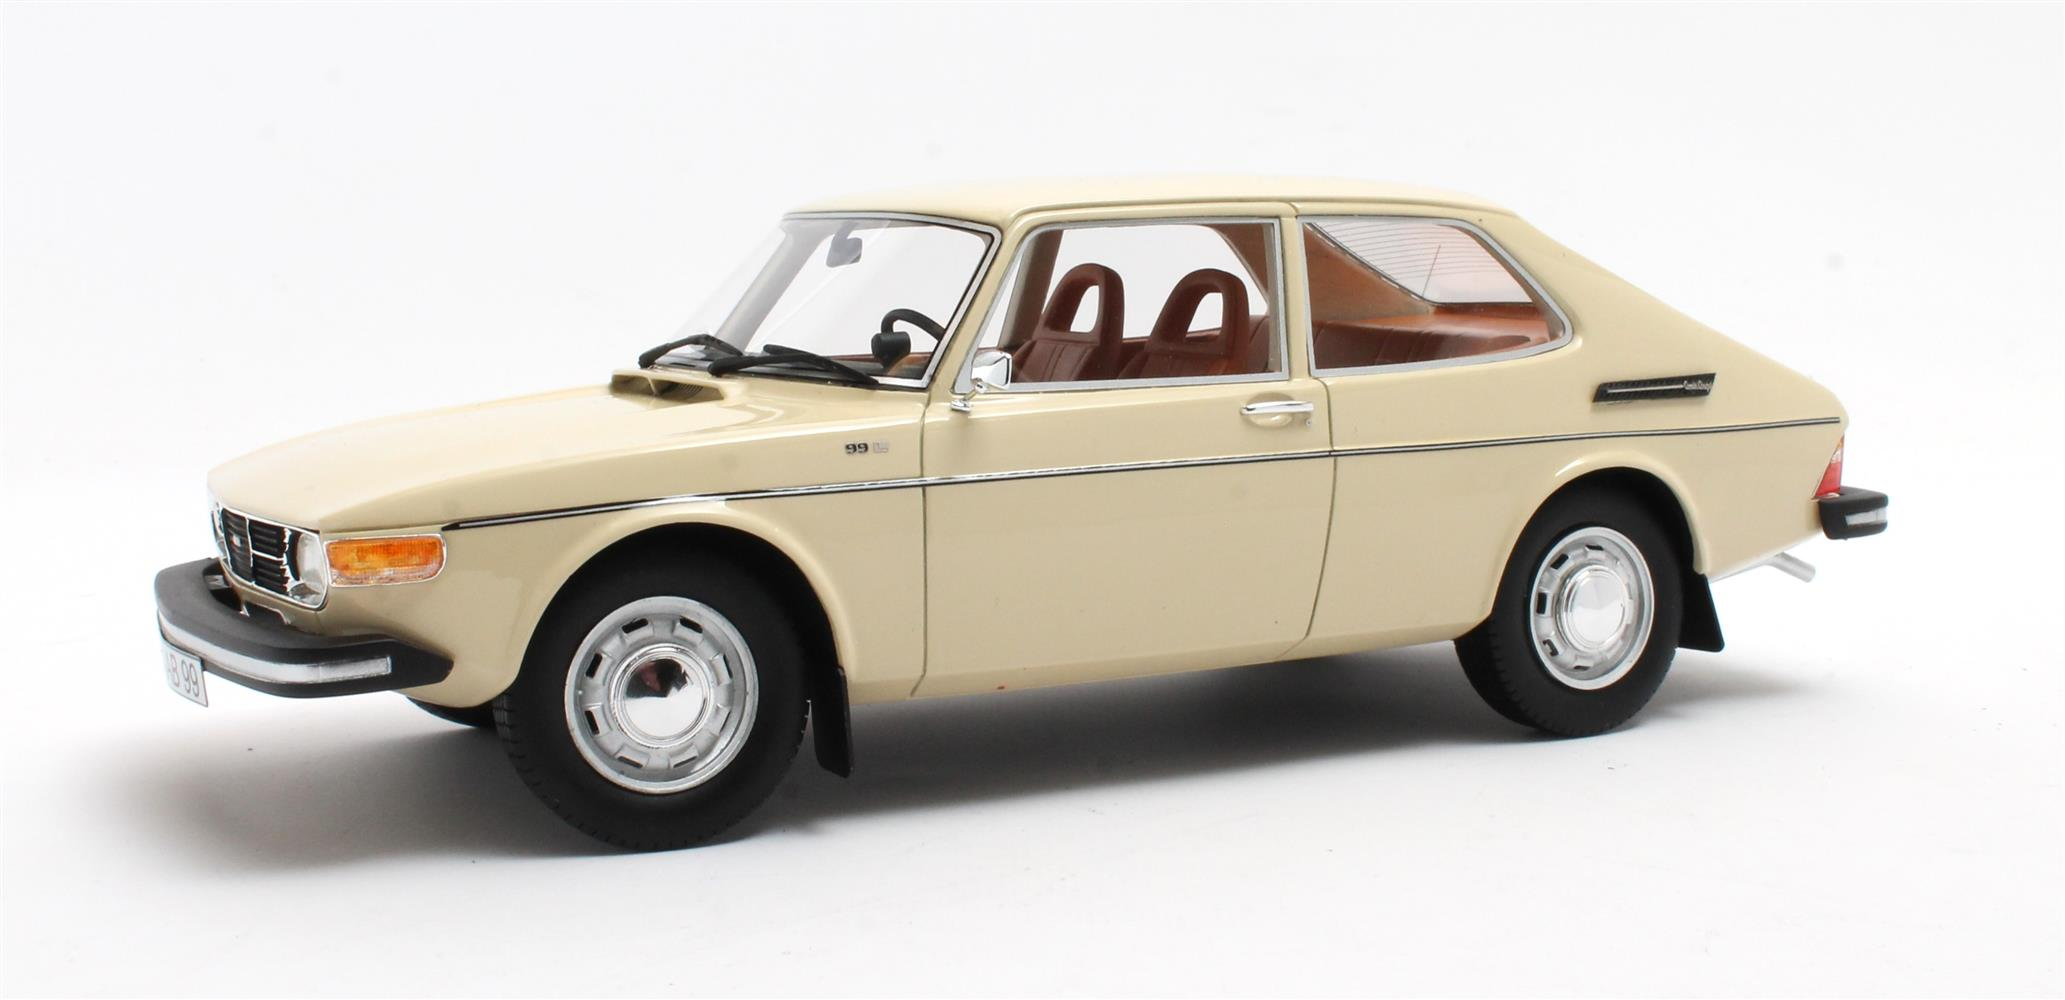 Saab 99 Combi orchid white 1975 1:18 Cult Scale Models 